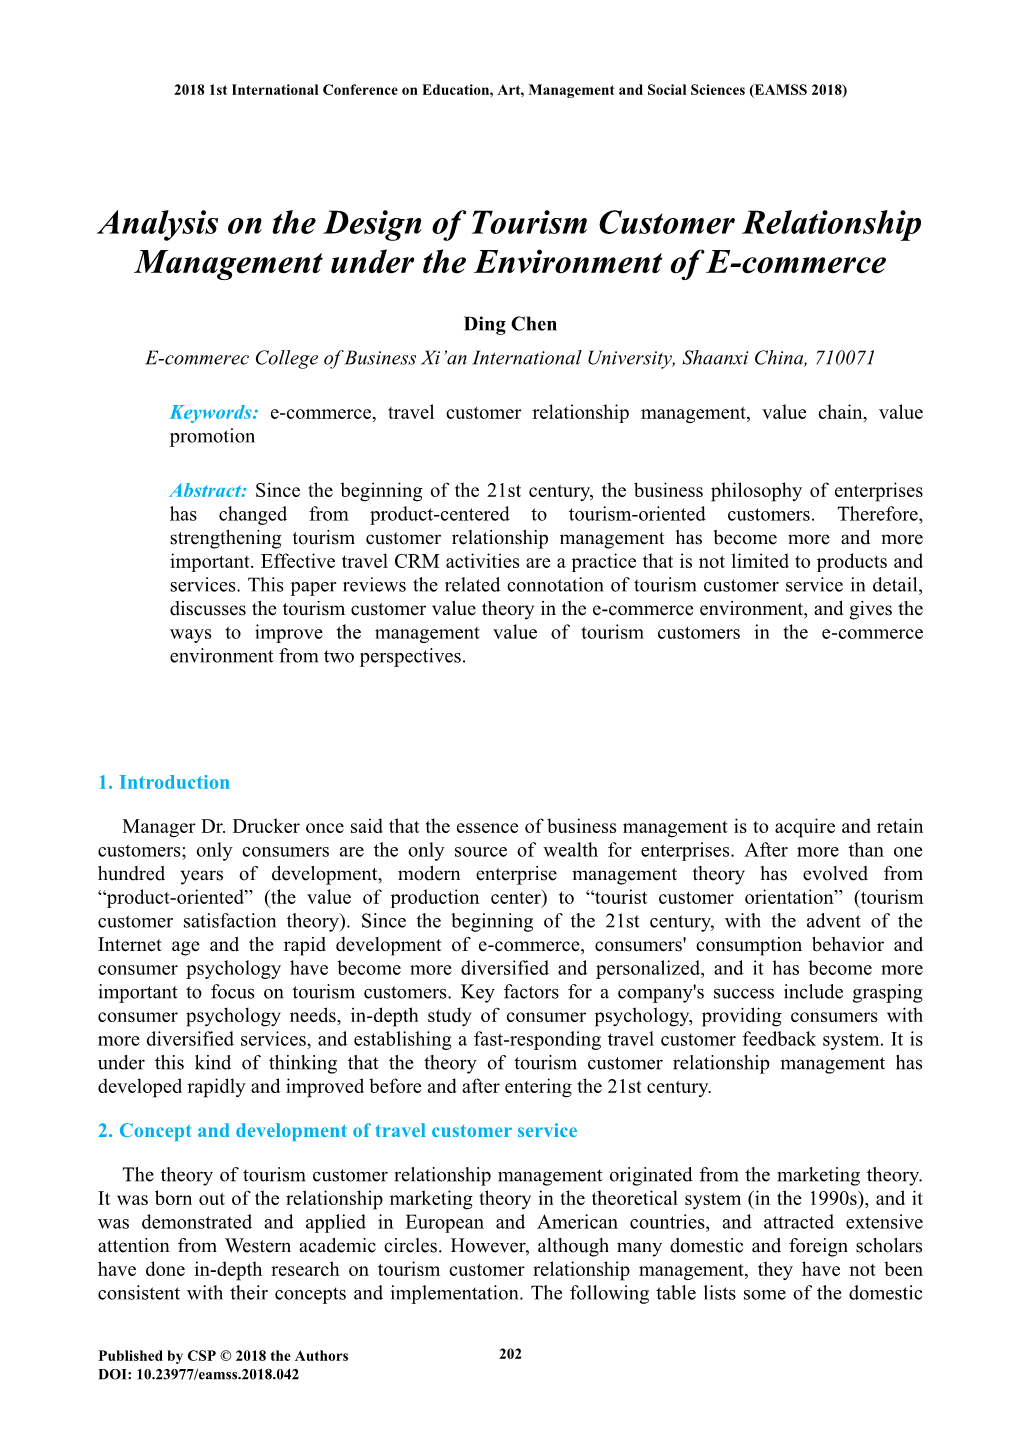 Analysis on the Design of Tourism Customer Relationship Management Under the Environment of E-Commerce